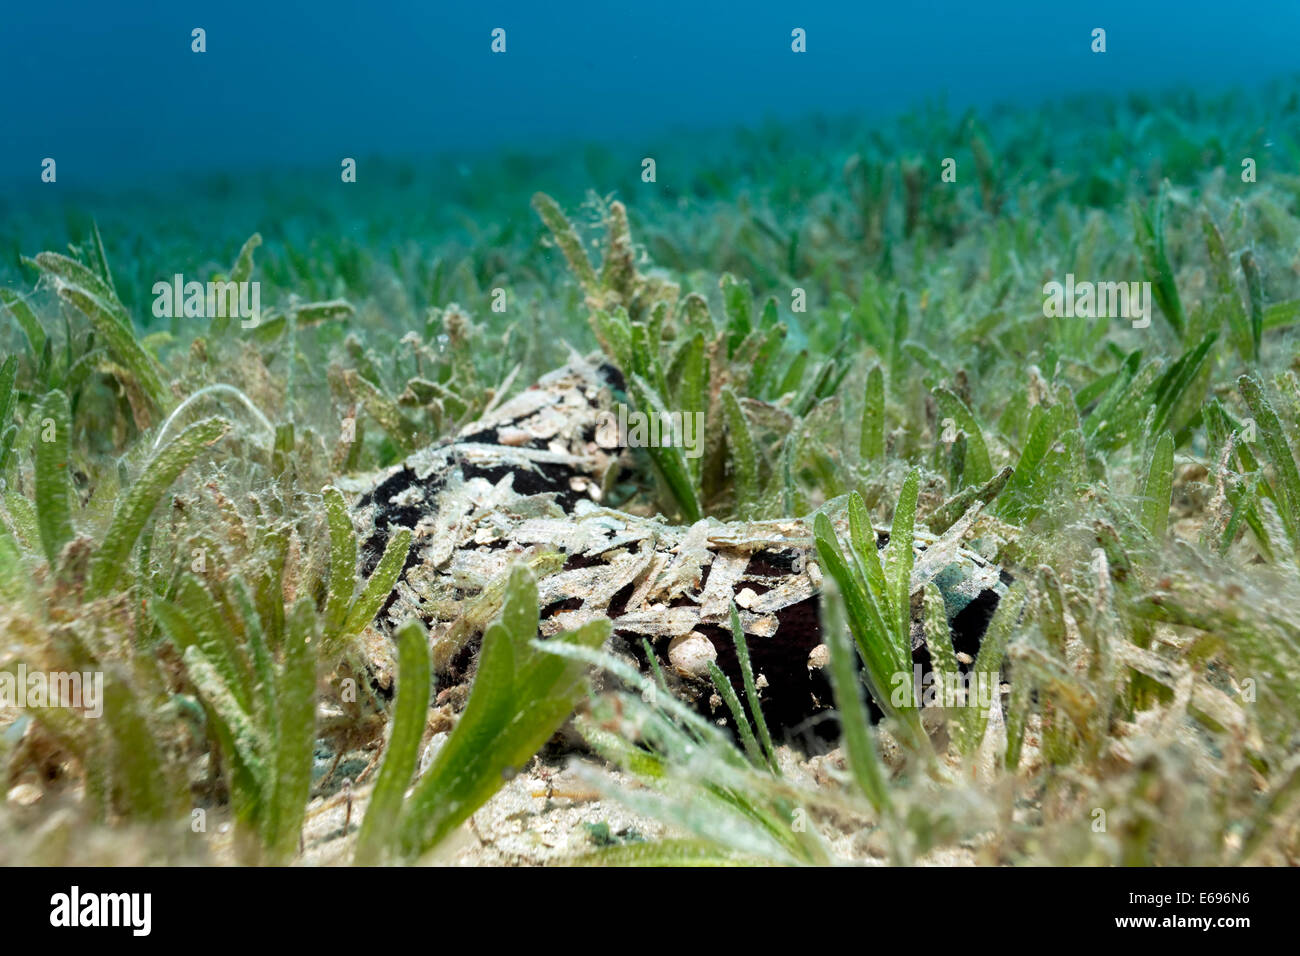 Sea cucumber (Actinopyga miliaris) camouflaged with leaves of the seagrass meadow, Makadi Bay, Red Sea, Hurghada, Egypt Stock Photo